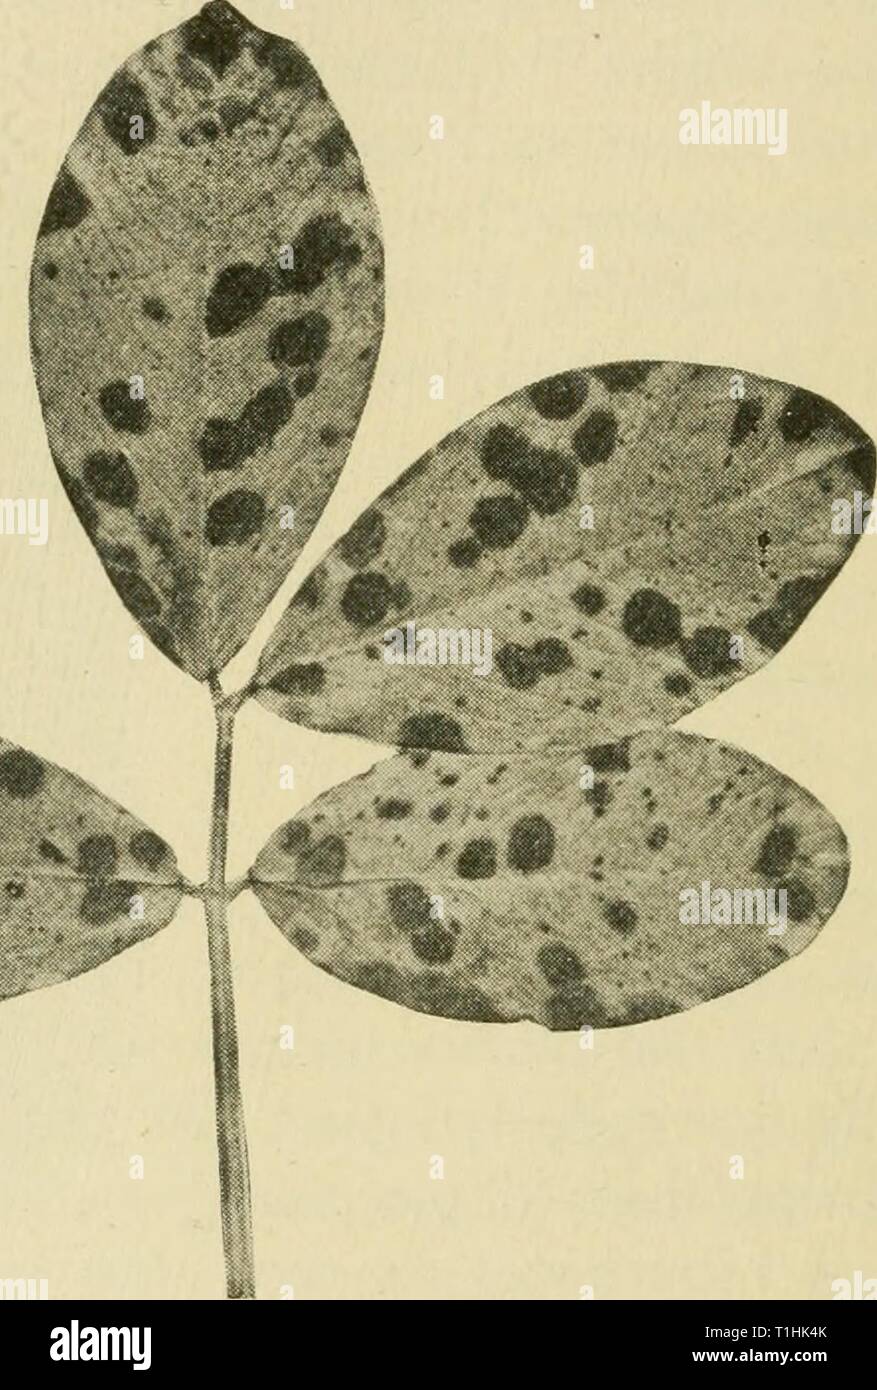 Diseases of economic plants (1921) Diseases of economic plants  diseasesofeconom01stev Year: 1921  214 Diseases of Economic Plants PEANUT Leaf-spot (Cercospora personata (B. & C.) Ell.).—This leaf-spot is circular in outline, indefinitely bordered, black to brown in the center and grading to green on its outer edge. The lower leaves are first affected and suffer most; later the disease spreads to the upper leaves. The leaves    Fig. 116. — Peanut leaf-spot. After Wolf. begin to fall soon after they spot, and in many cases the death of the plant results. It is often a pest. The causal fungus wa Stock Photo